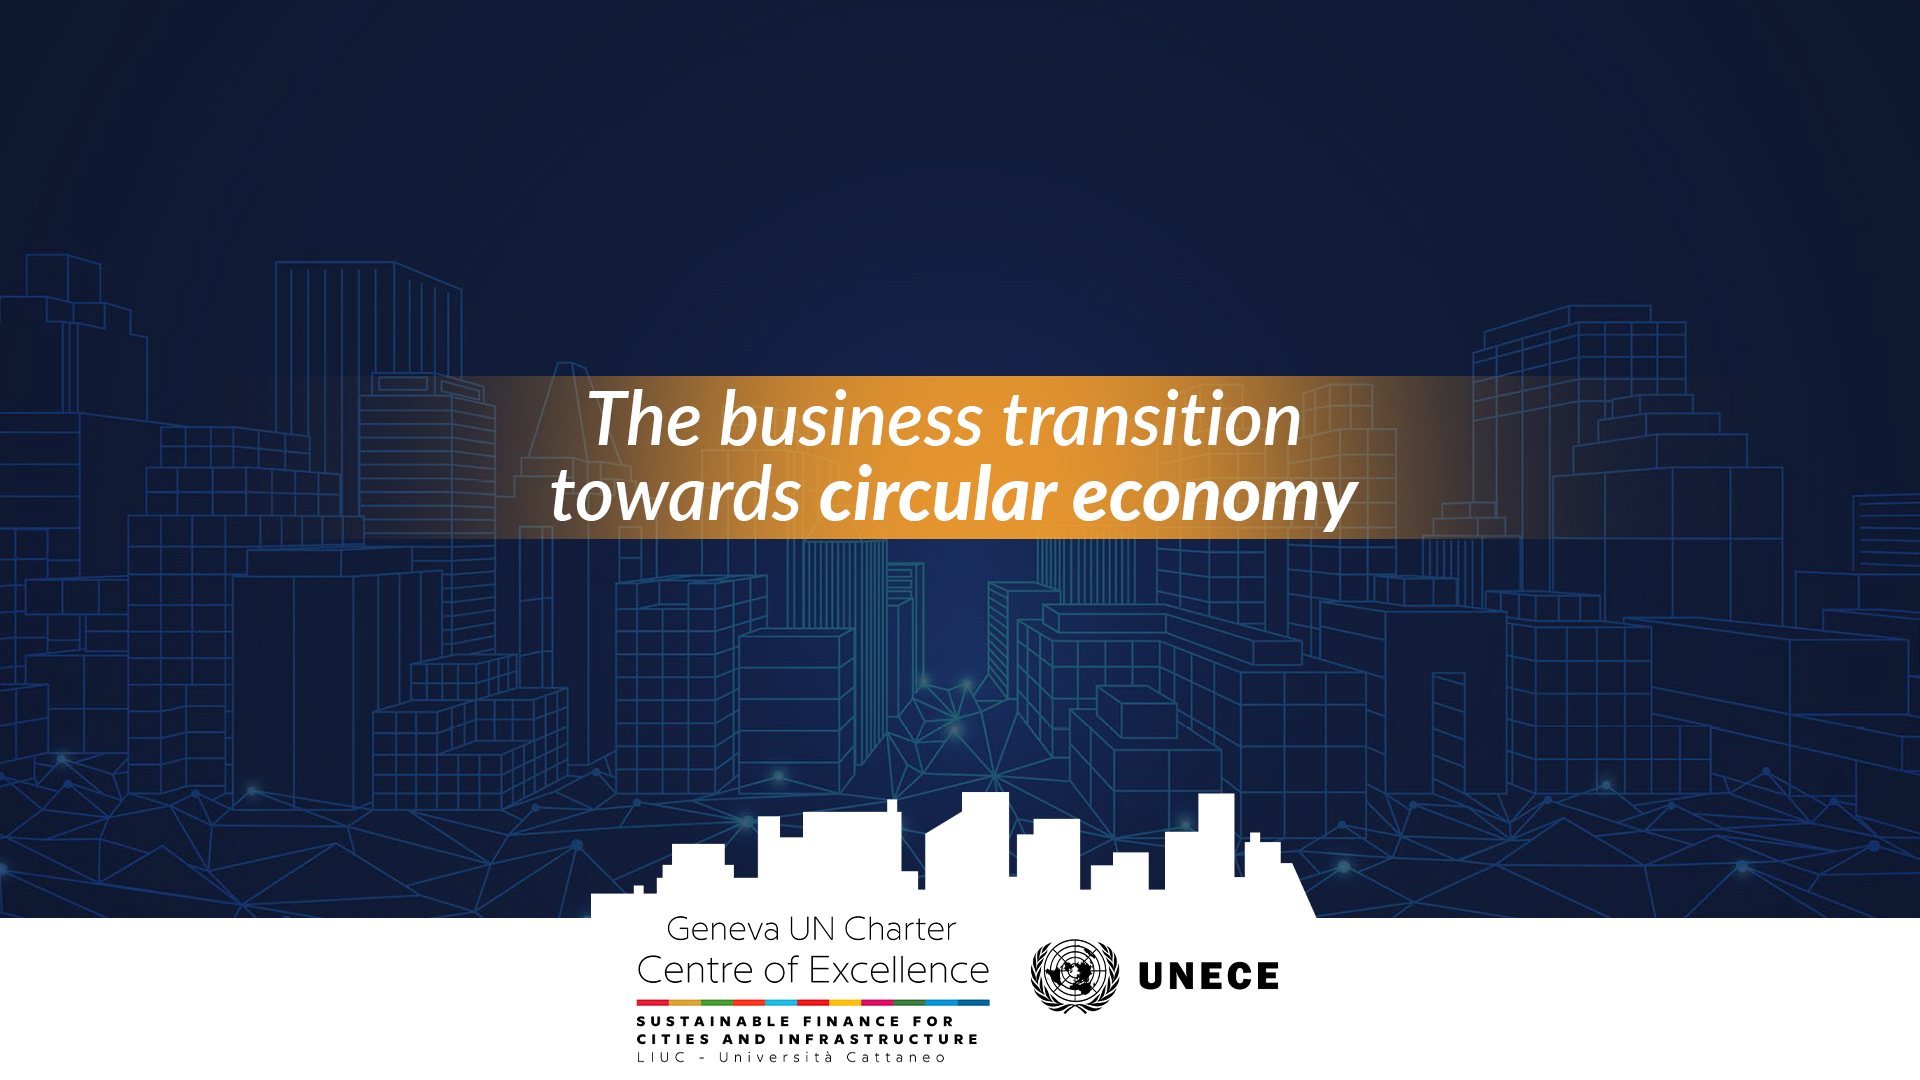 The business transition towards circular economy